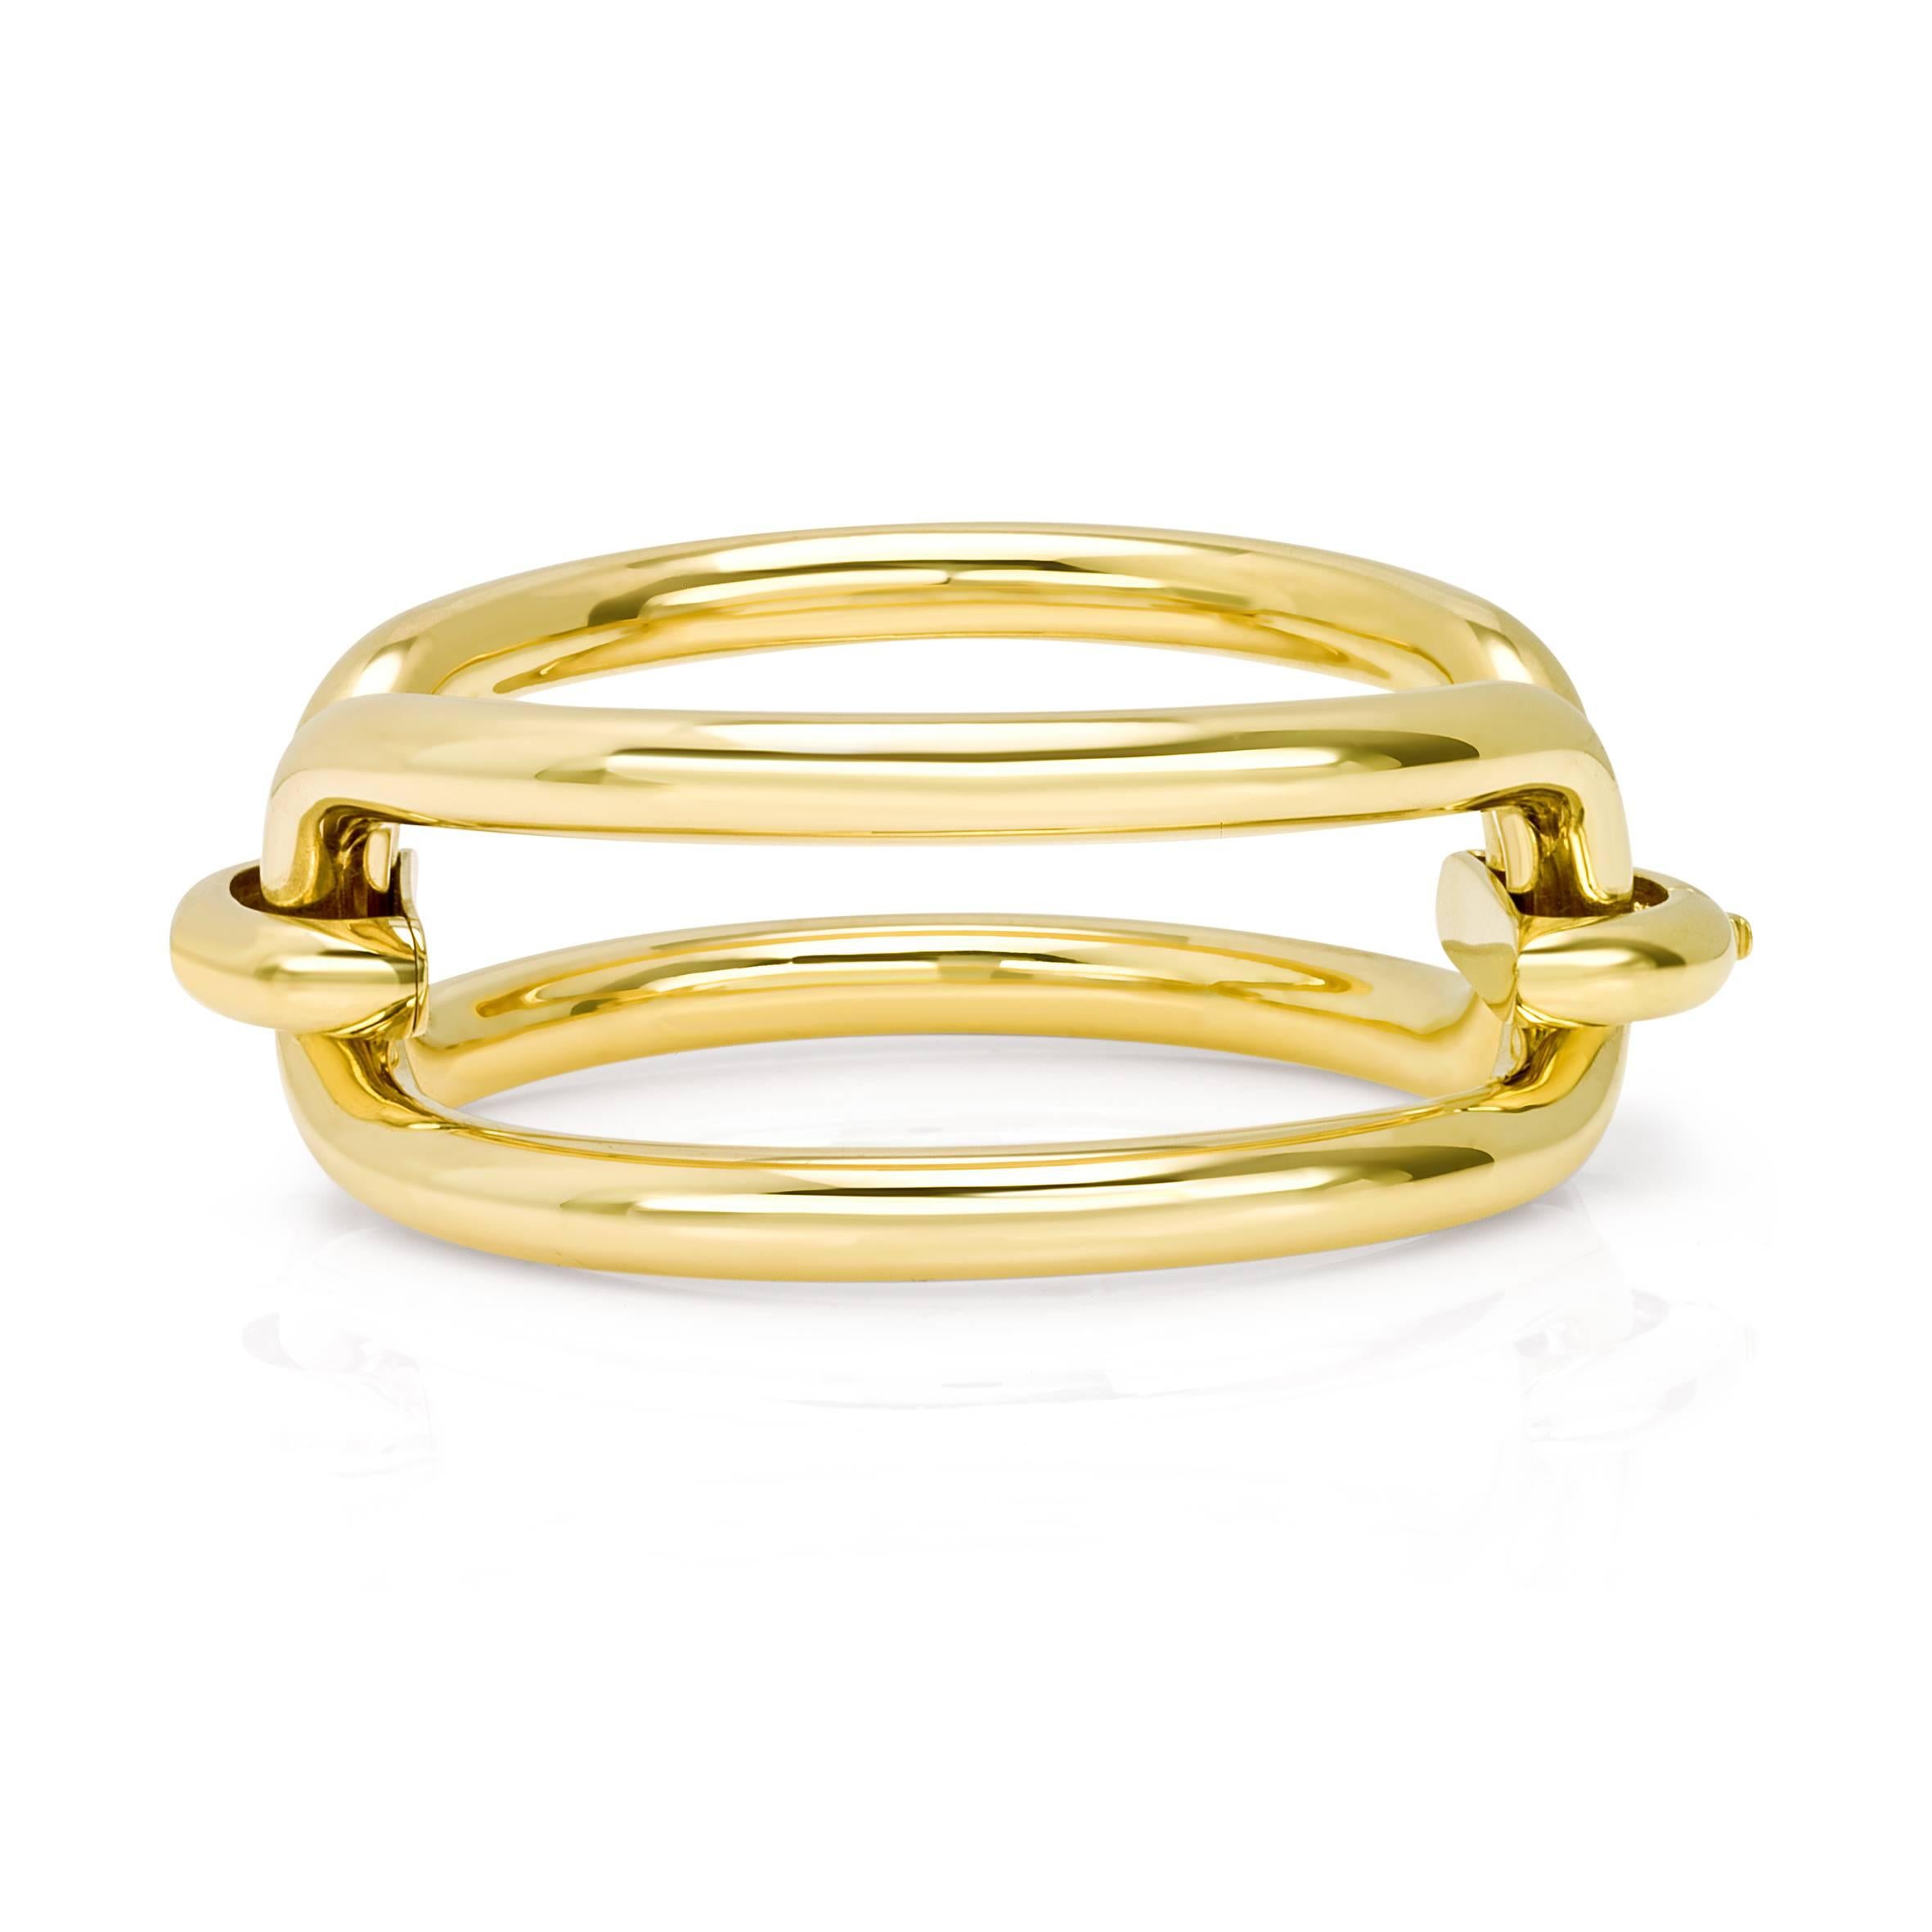 Roberta collection bangle in 18 kt  yellow gold
The newest and more popular collection of his year

the total weight of the gold is  gr 59.00

STAMP: 10 MI ITALY 750
